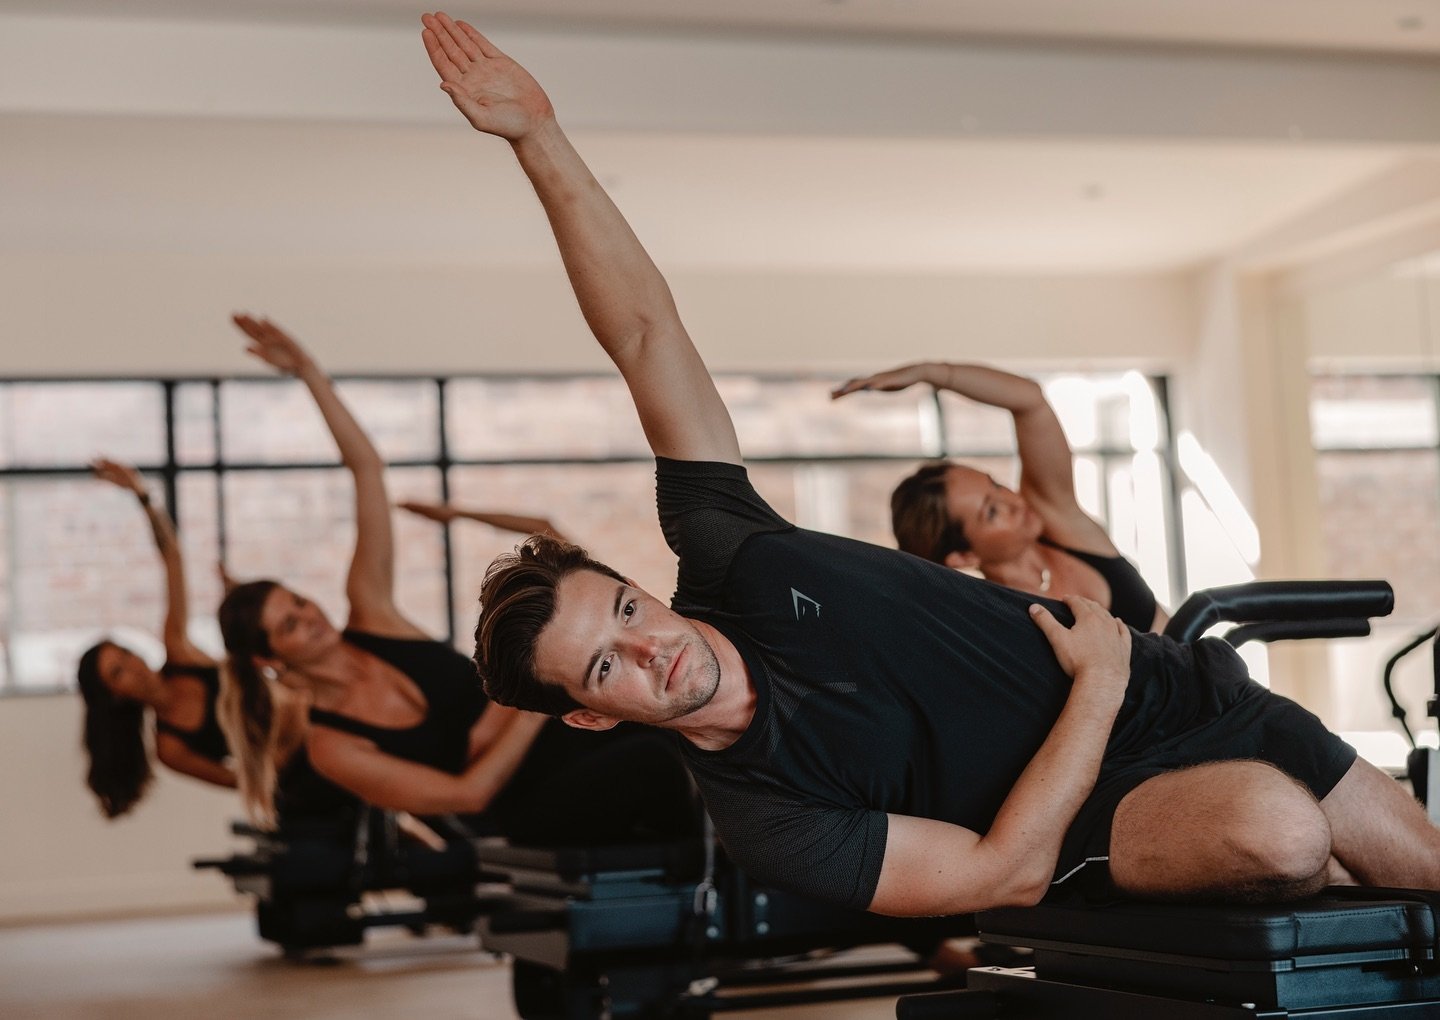 Ready to work your obliques?! 🔥 

The Xformer machines are not like your traditional reformers - they are designed to build strength, keep your heart rate high and to deliver a full body workout. We are the only studio in Australia with these machin